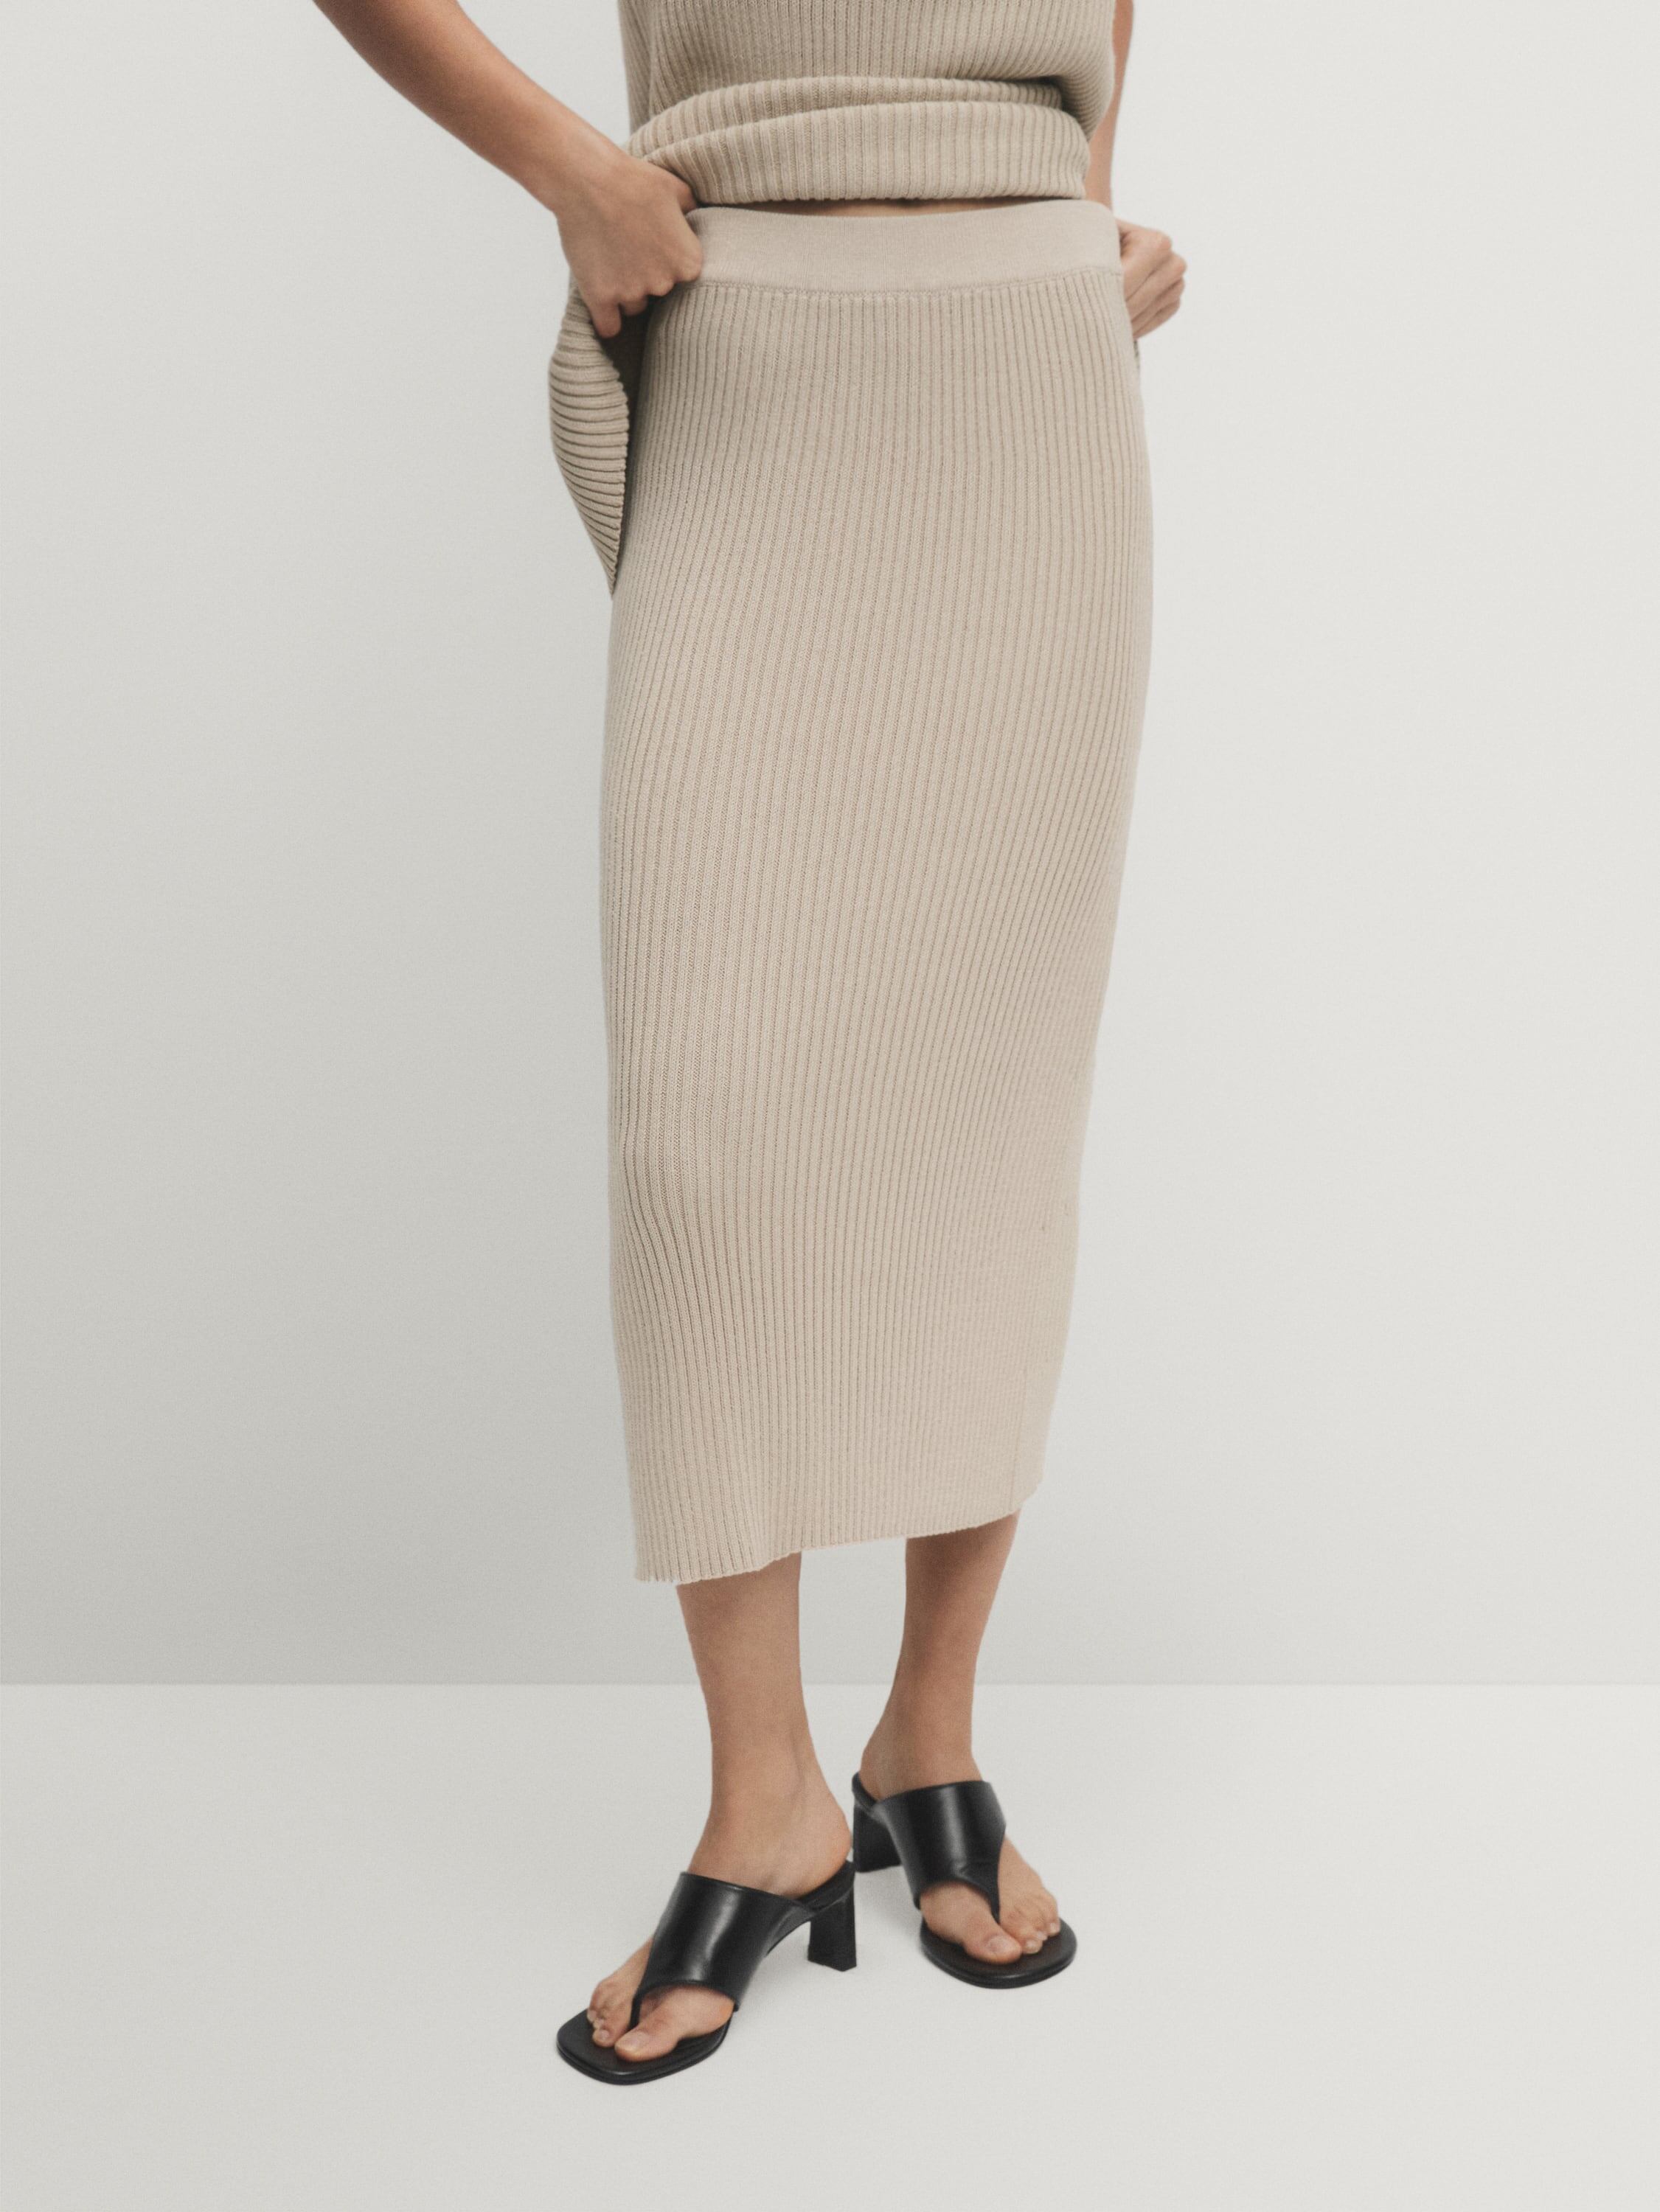 Long ribbed skirt with slit detail